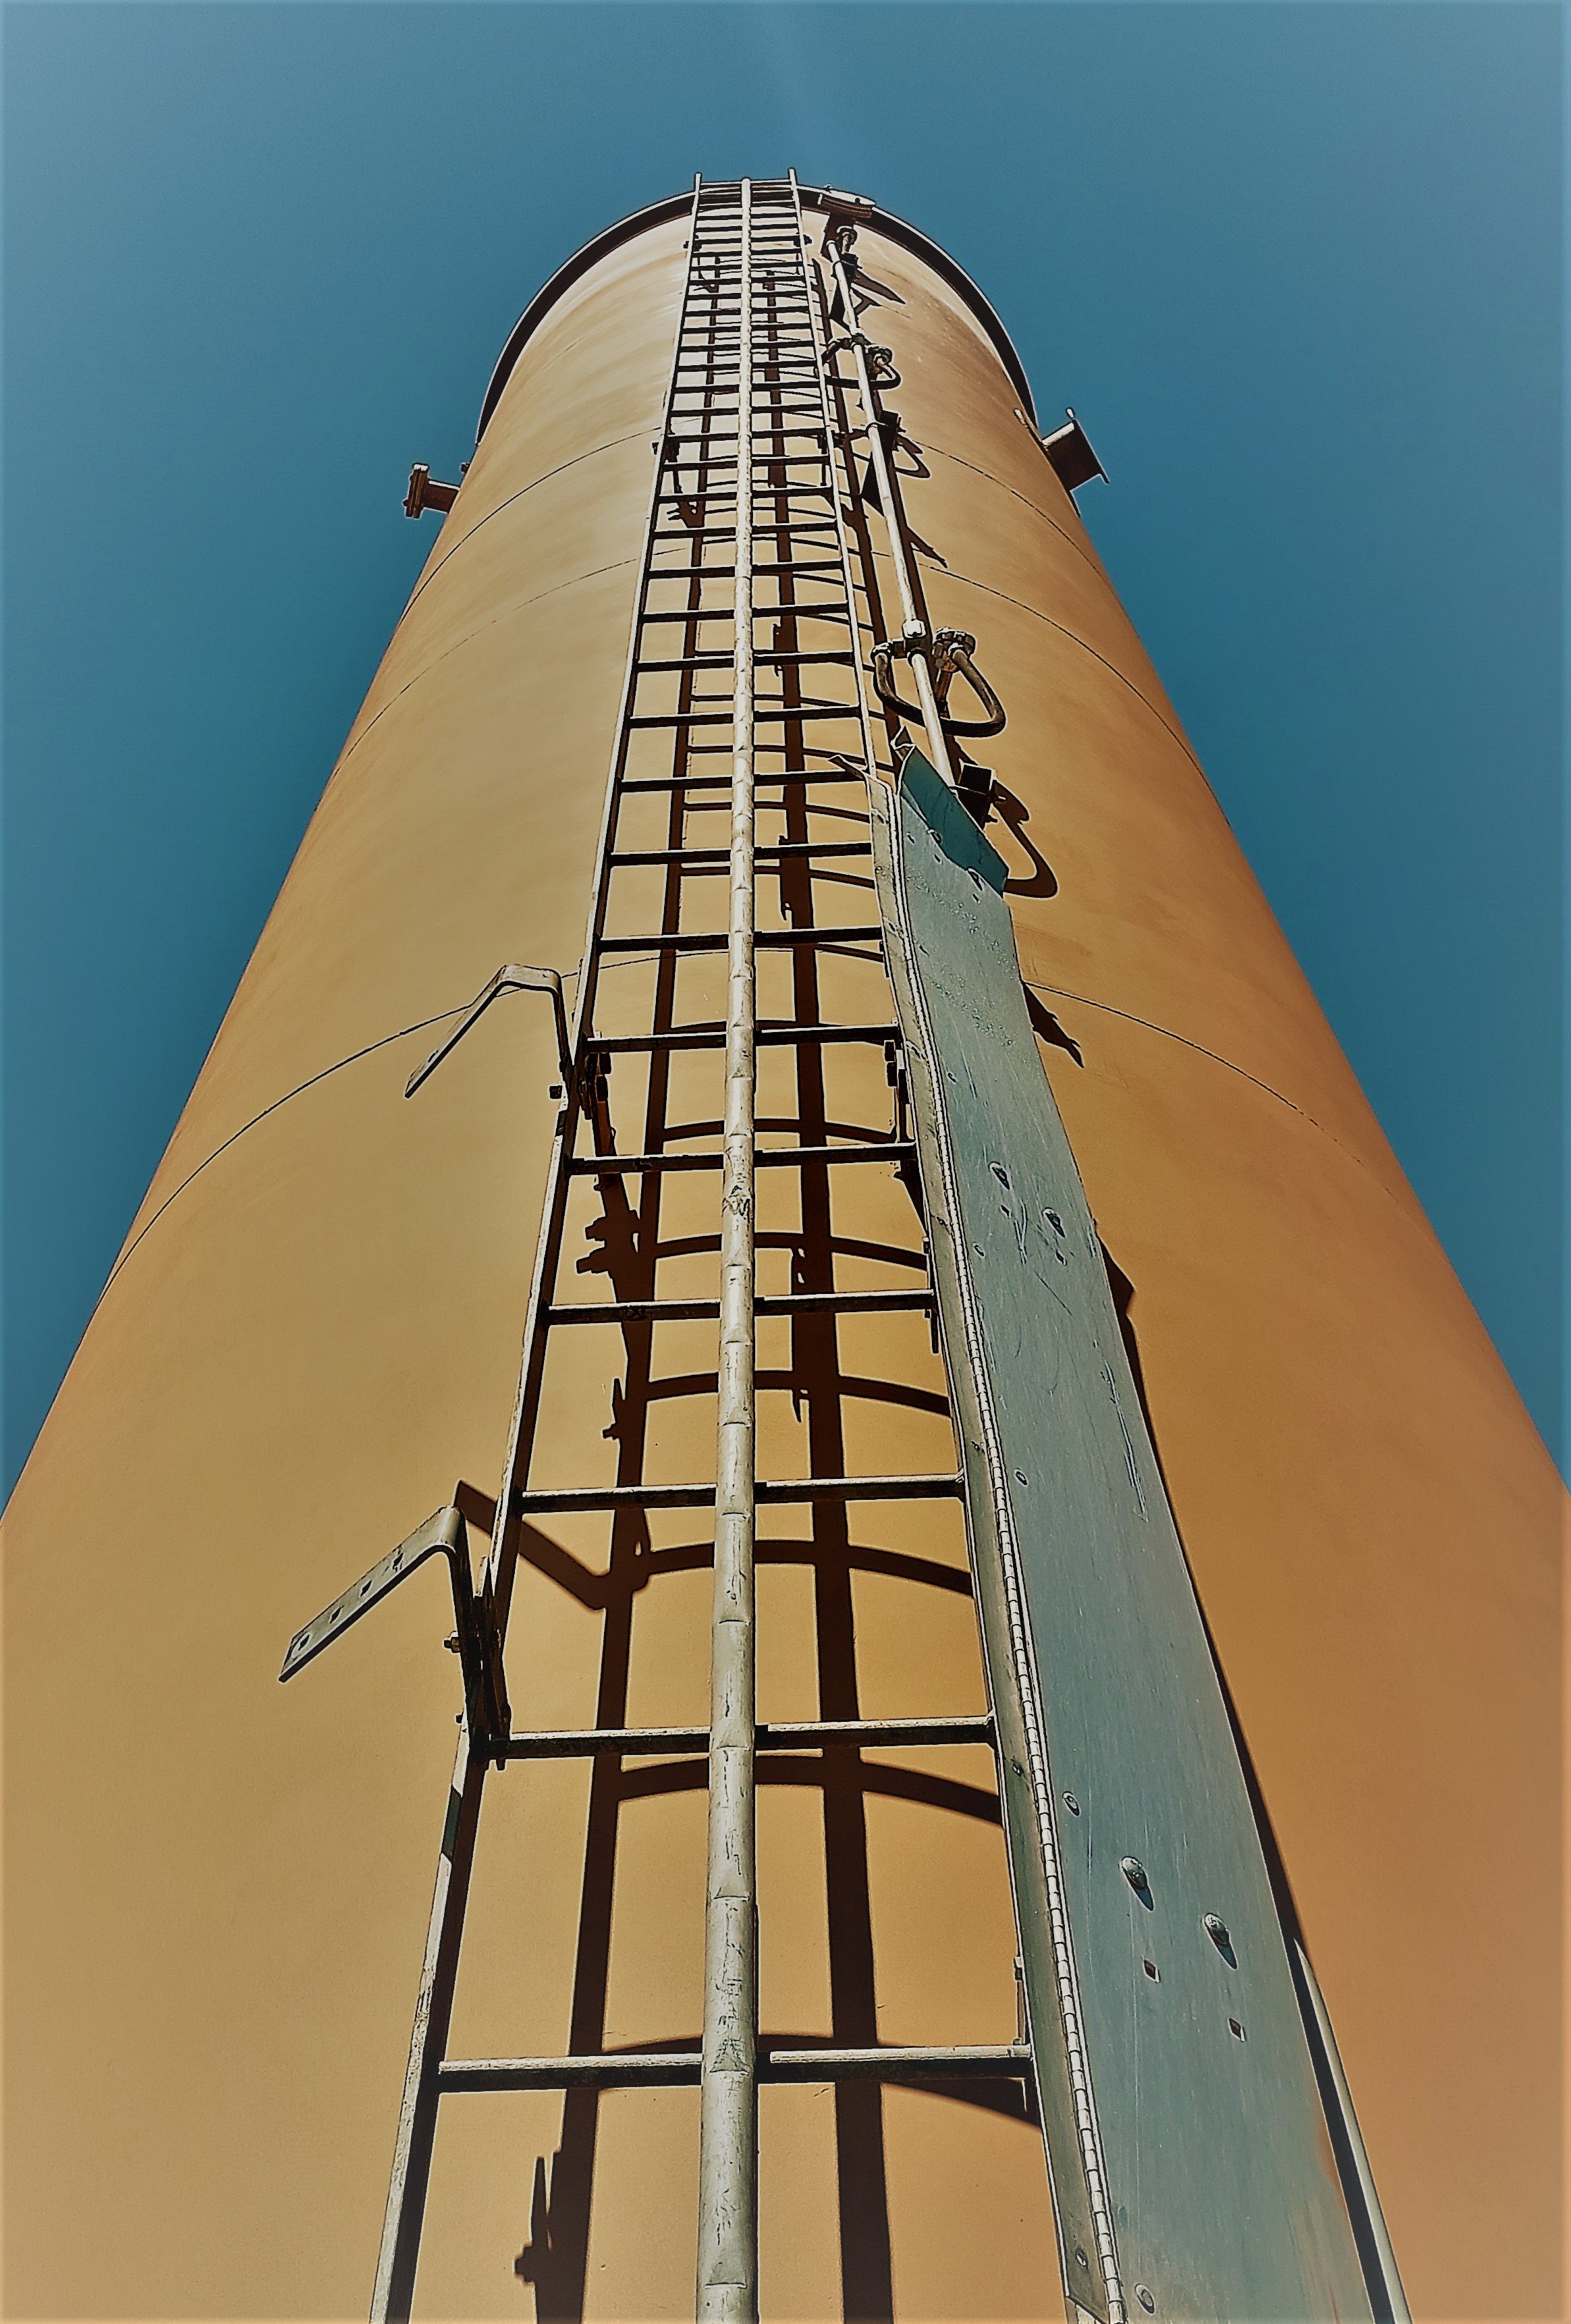 An enclosed flare tower reaching toward the sky.